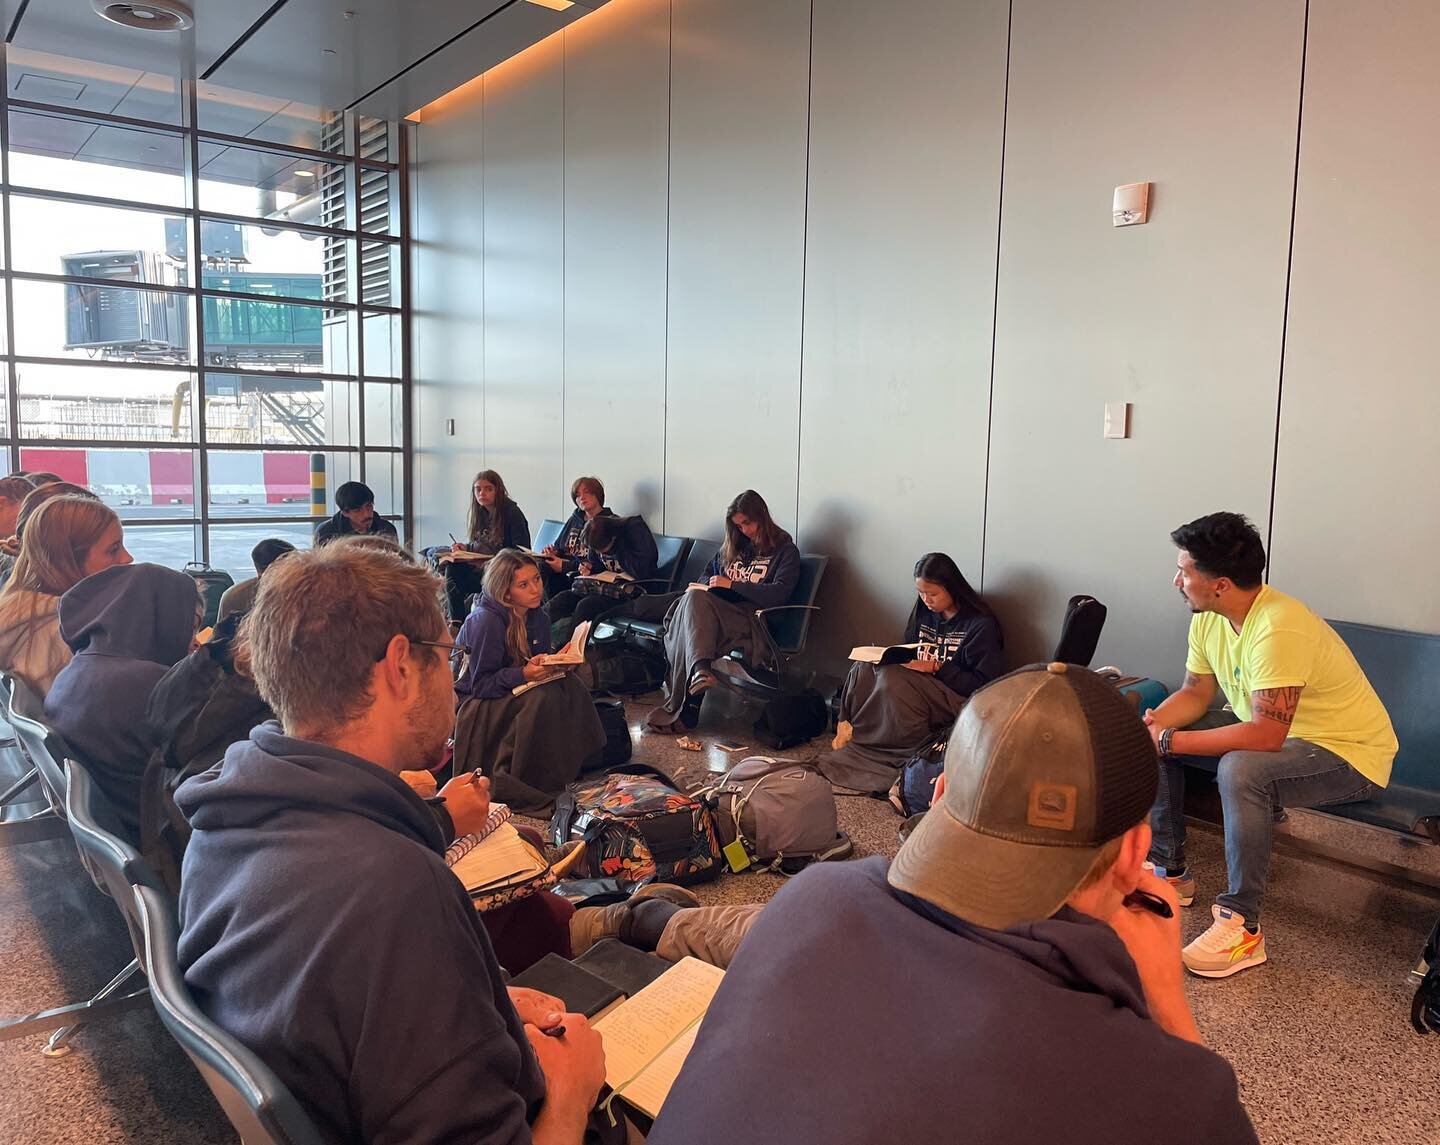 If you&rsquo;ve been a summer intern you know this scene: airport Bible studies. 

Wherever you go on summer internship, the Bible comes with you. It&rsquo;s that explosive combination of God&rsquo;s Word and a cross-cultural experience that changes 